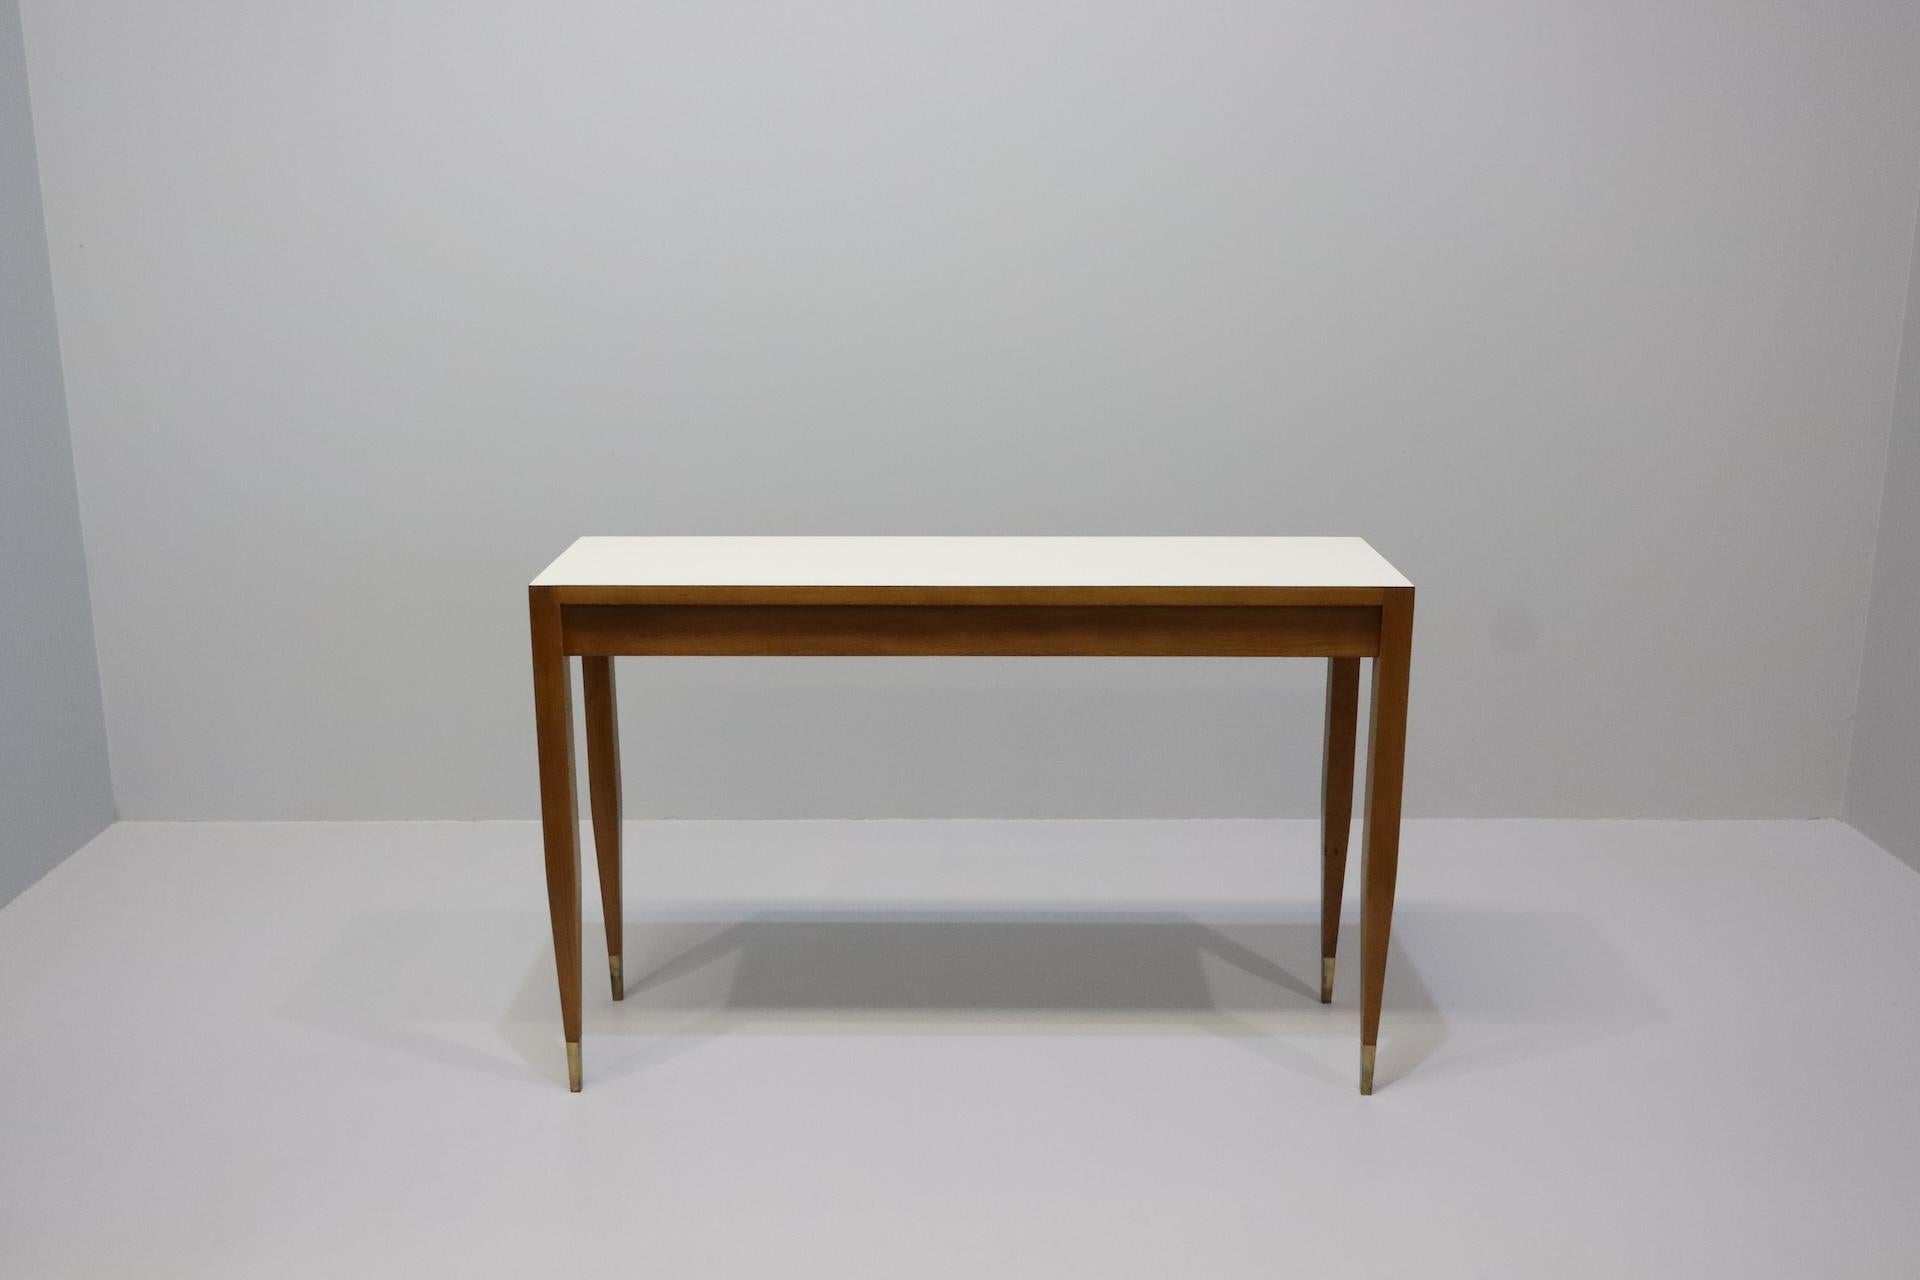 Pair Gio Ponti Consoles for Giordano Chiesa Italy, 1964 For Sale 4